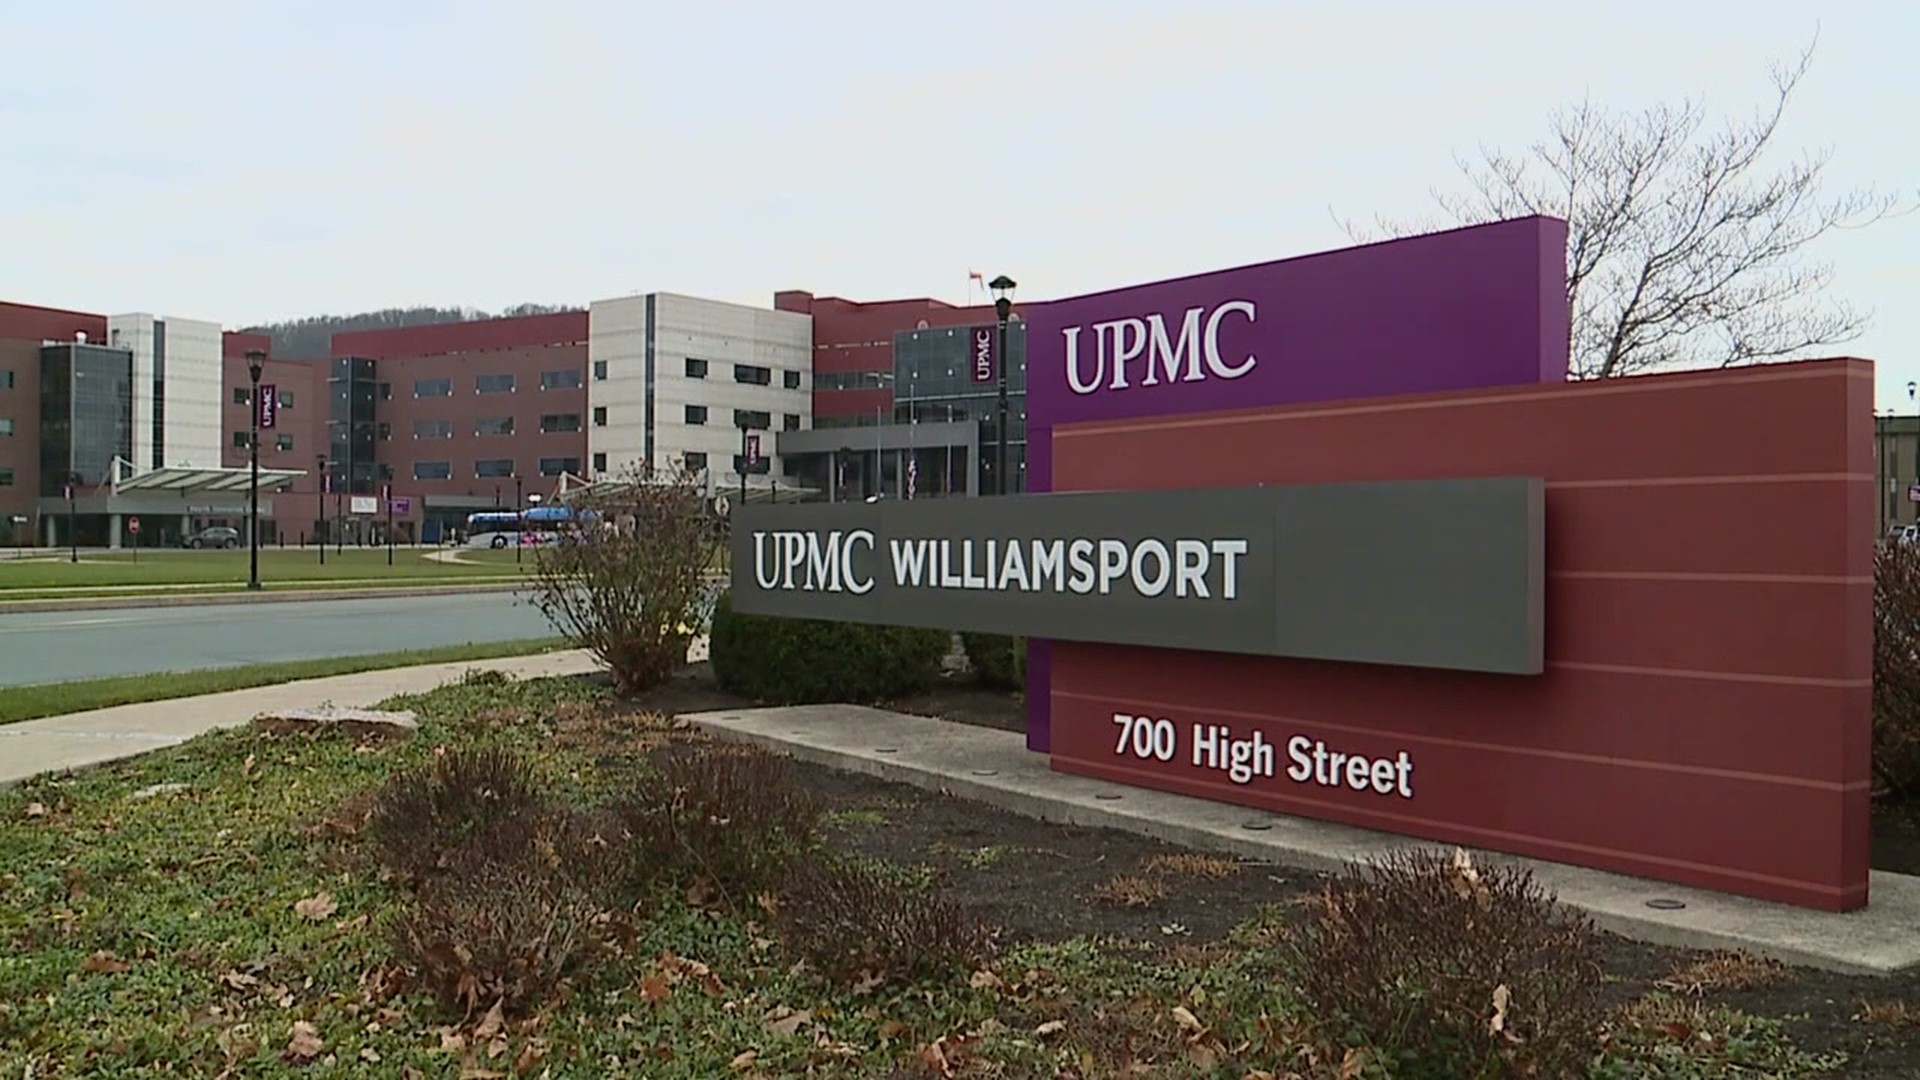 Medical professionals at UPMC are asking people to take necessary precautions heading into the winter.